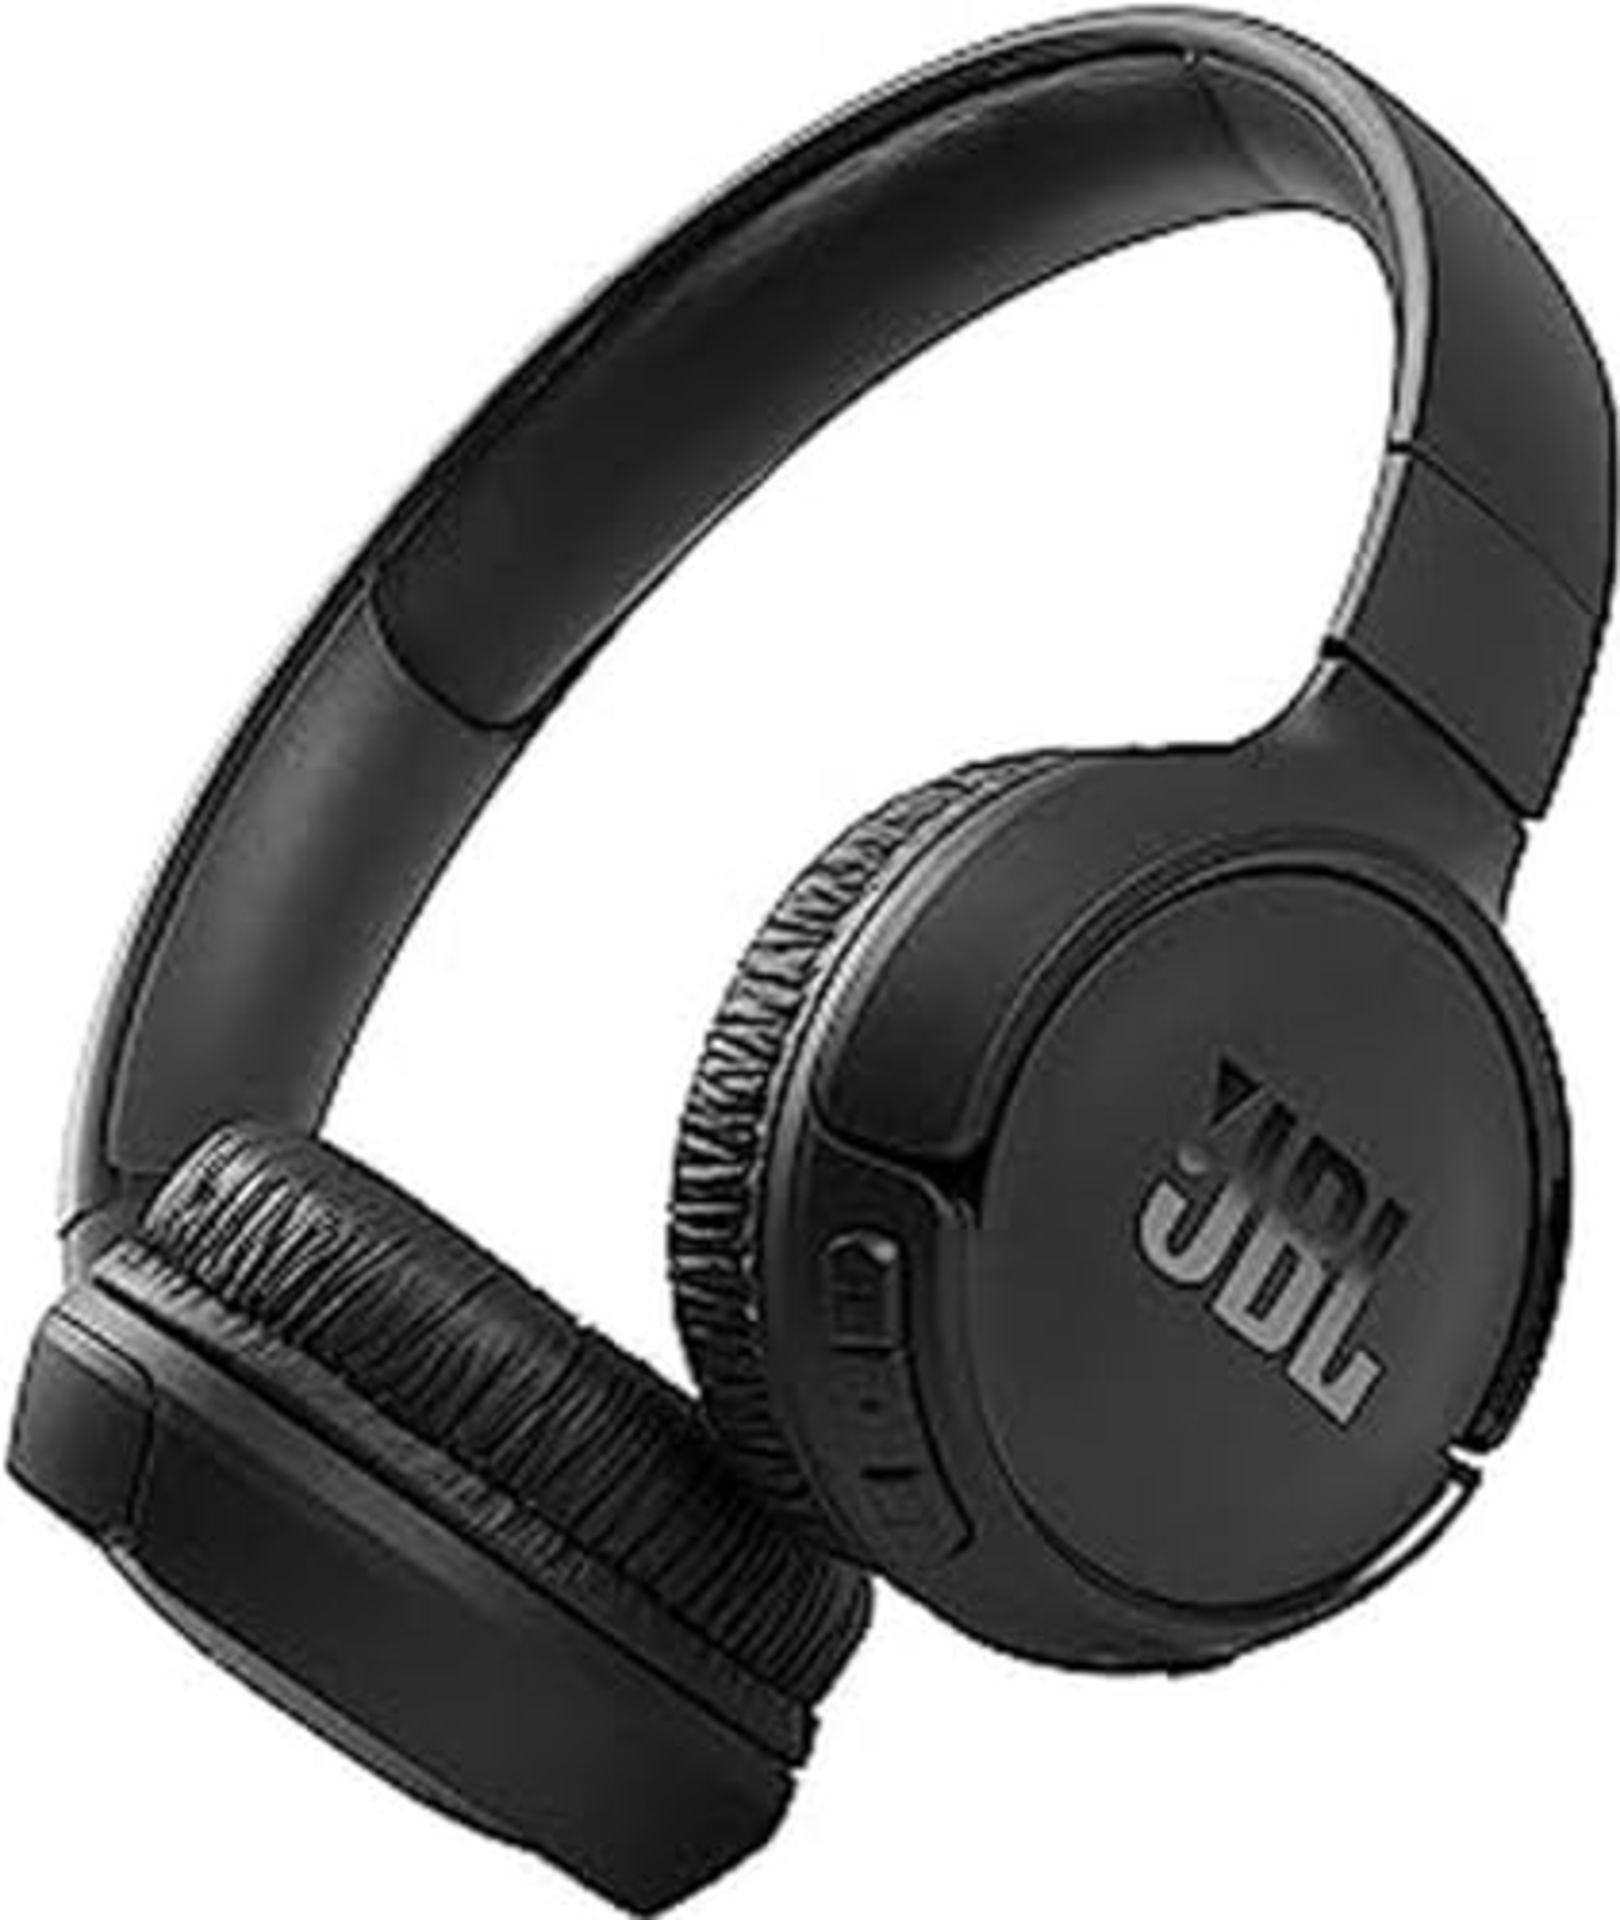 JBL Tune 510BT On-Ear Wireless Headphones, Bluetooth 5.0, Foldable, Built-in Microphon - Image 3 of 4